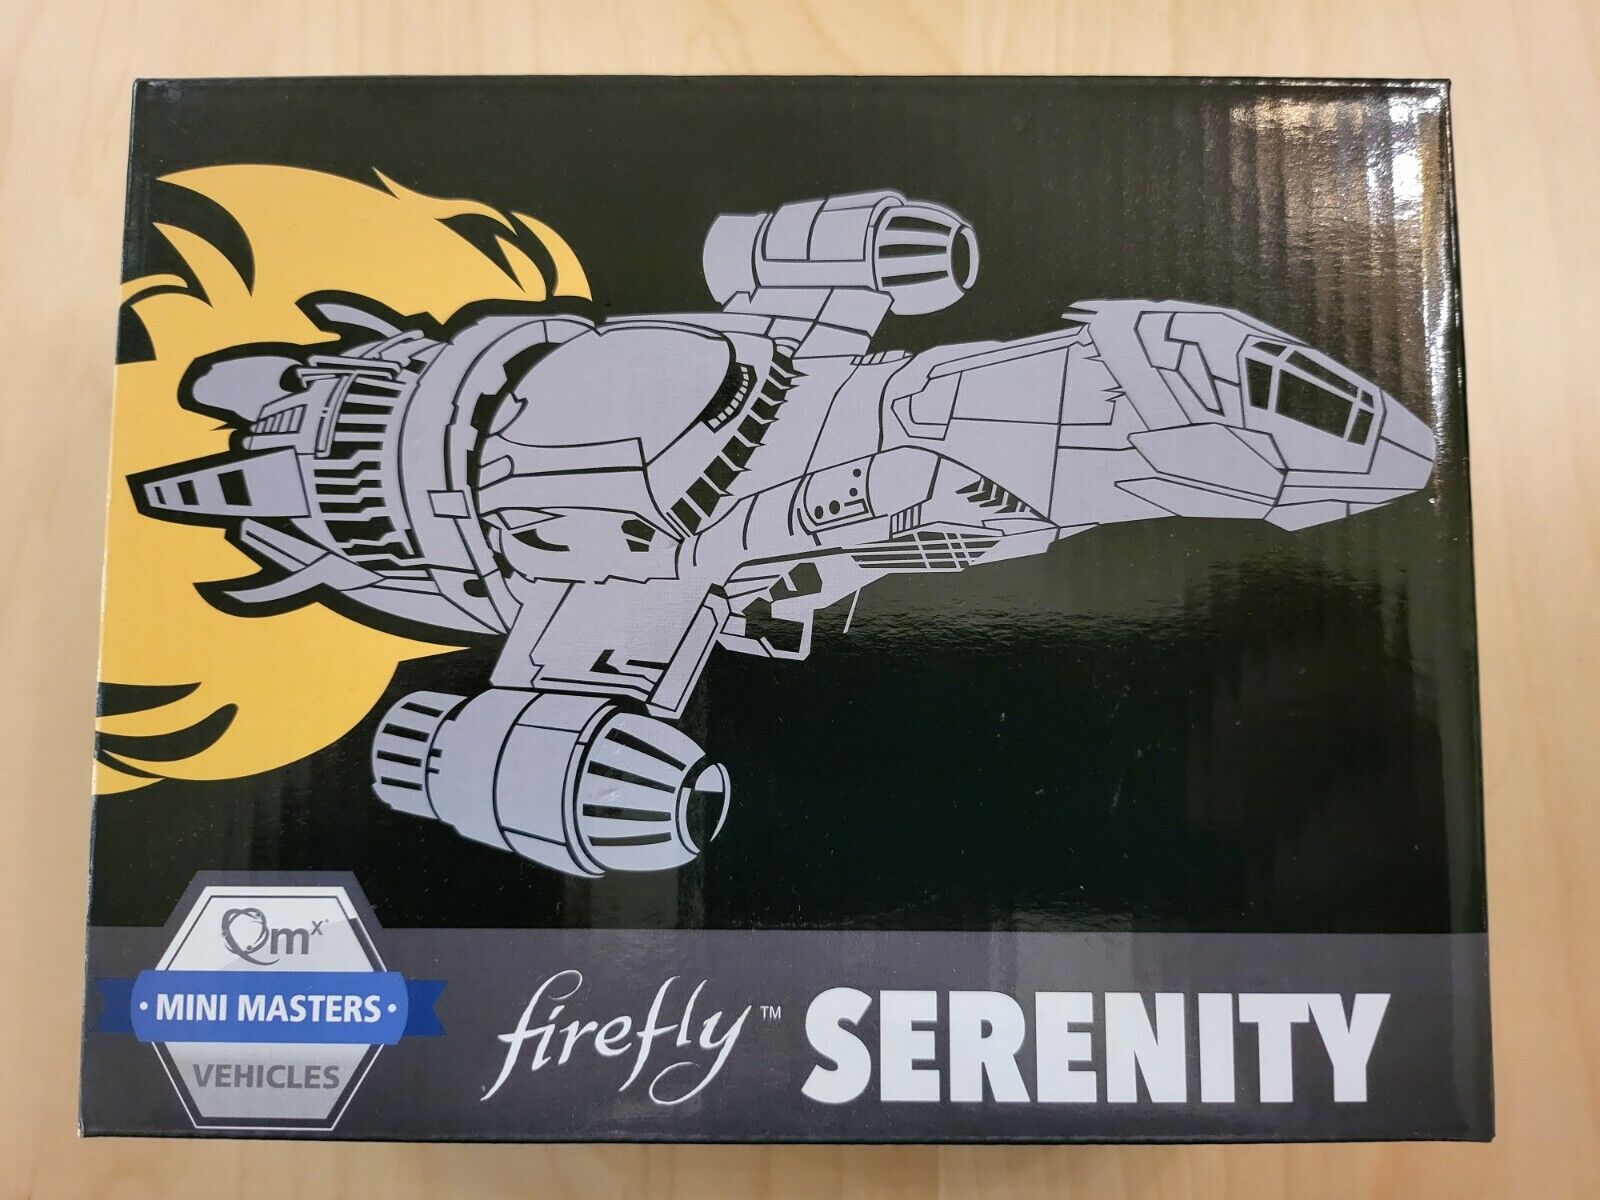 Qmx Firefly Mini Masters Vehicles - Serenity - Loot Crate Exclusive Nib